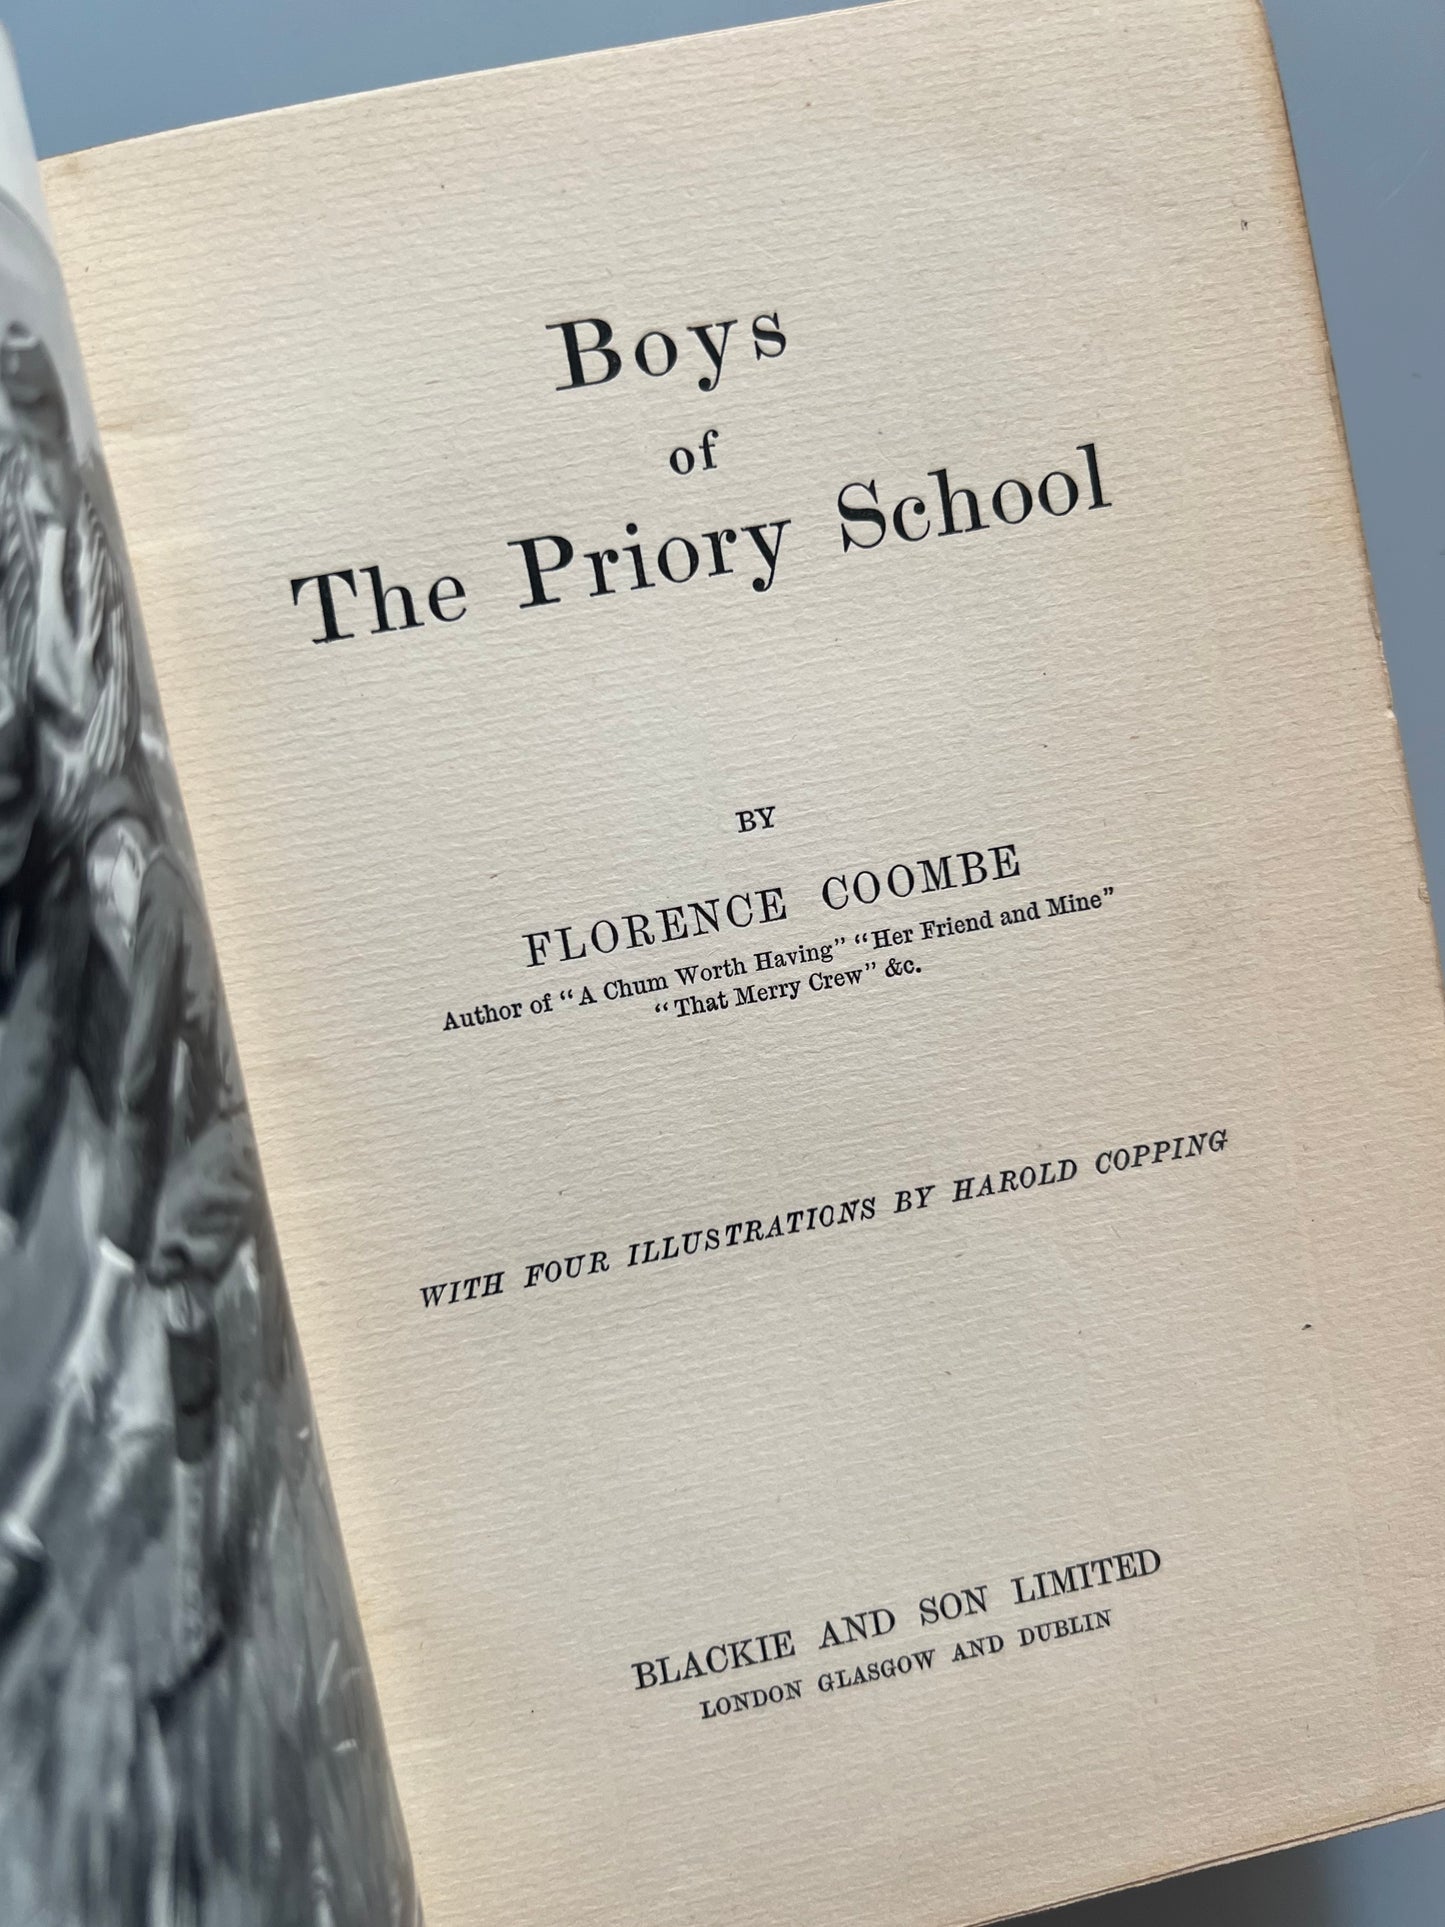 Boys of the priory school, Florence Coombe - Blackie and Son, ca. 1910